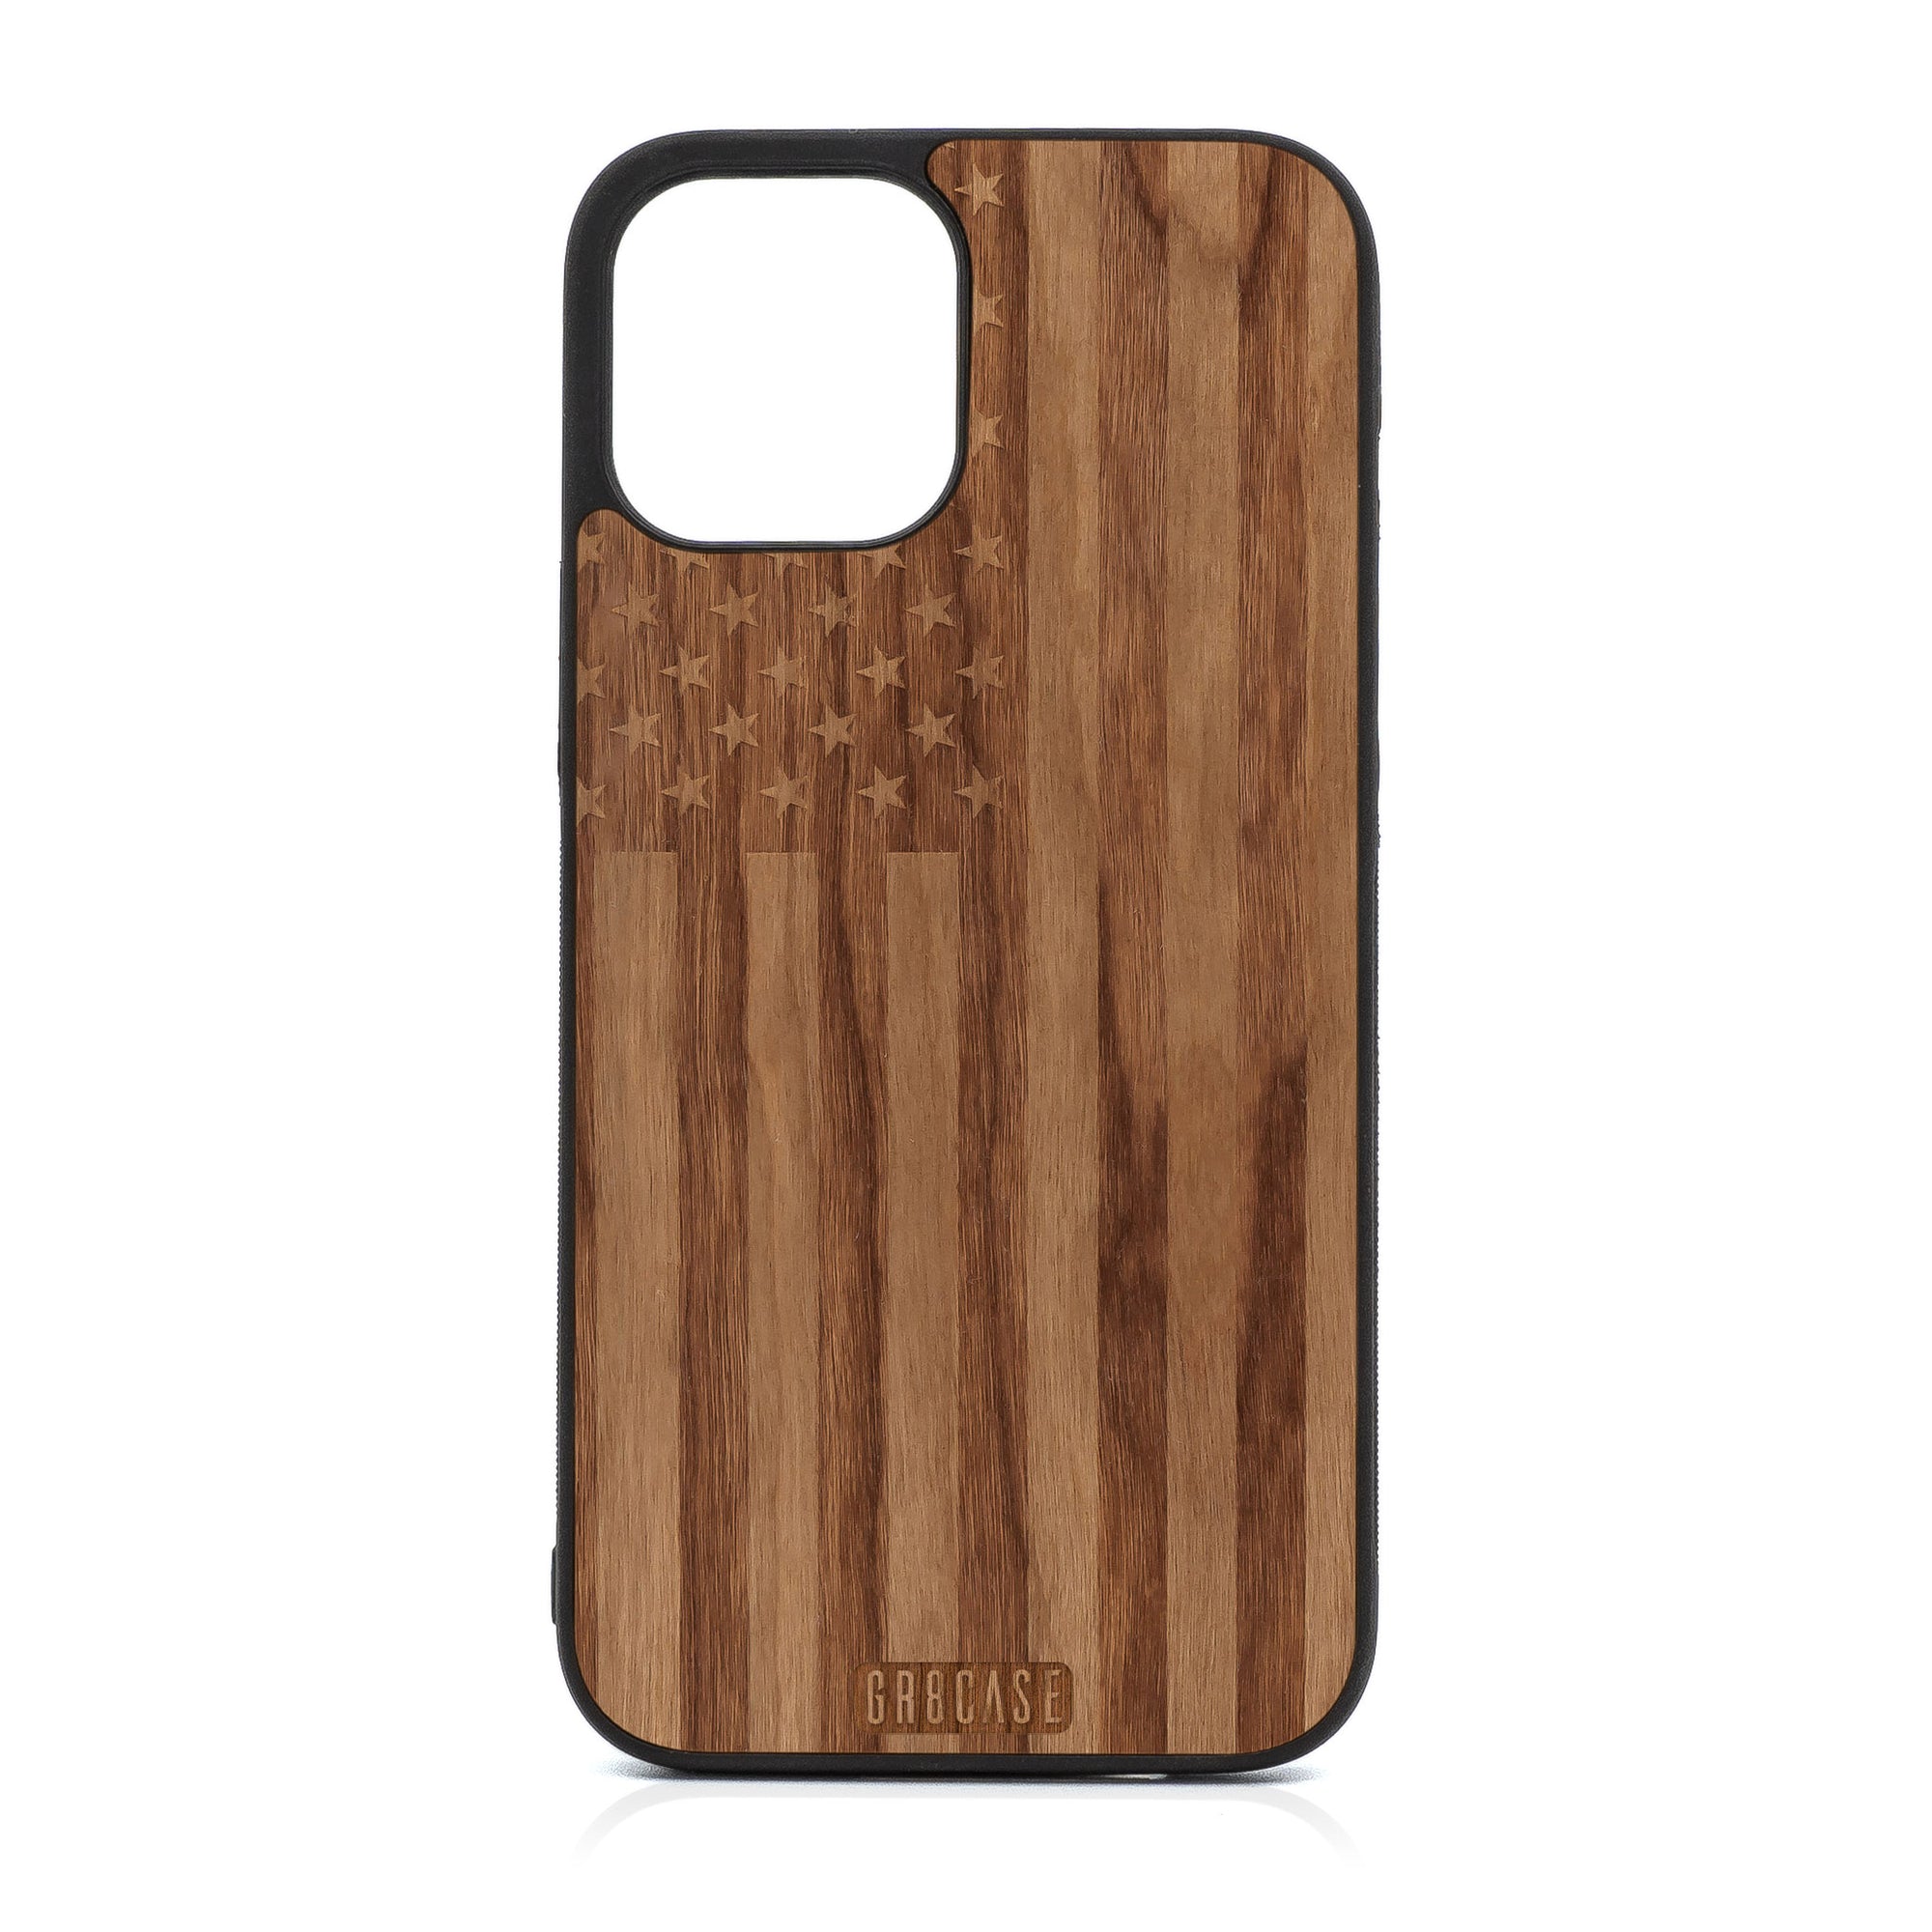 USA Flag Design Wood Case For iPhone 12 Pro Max